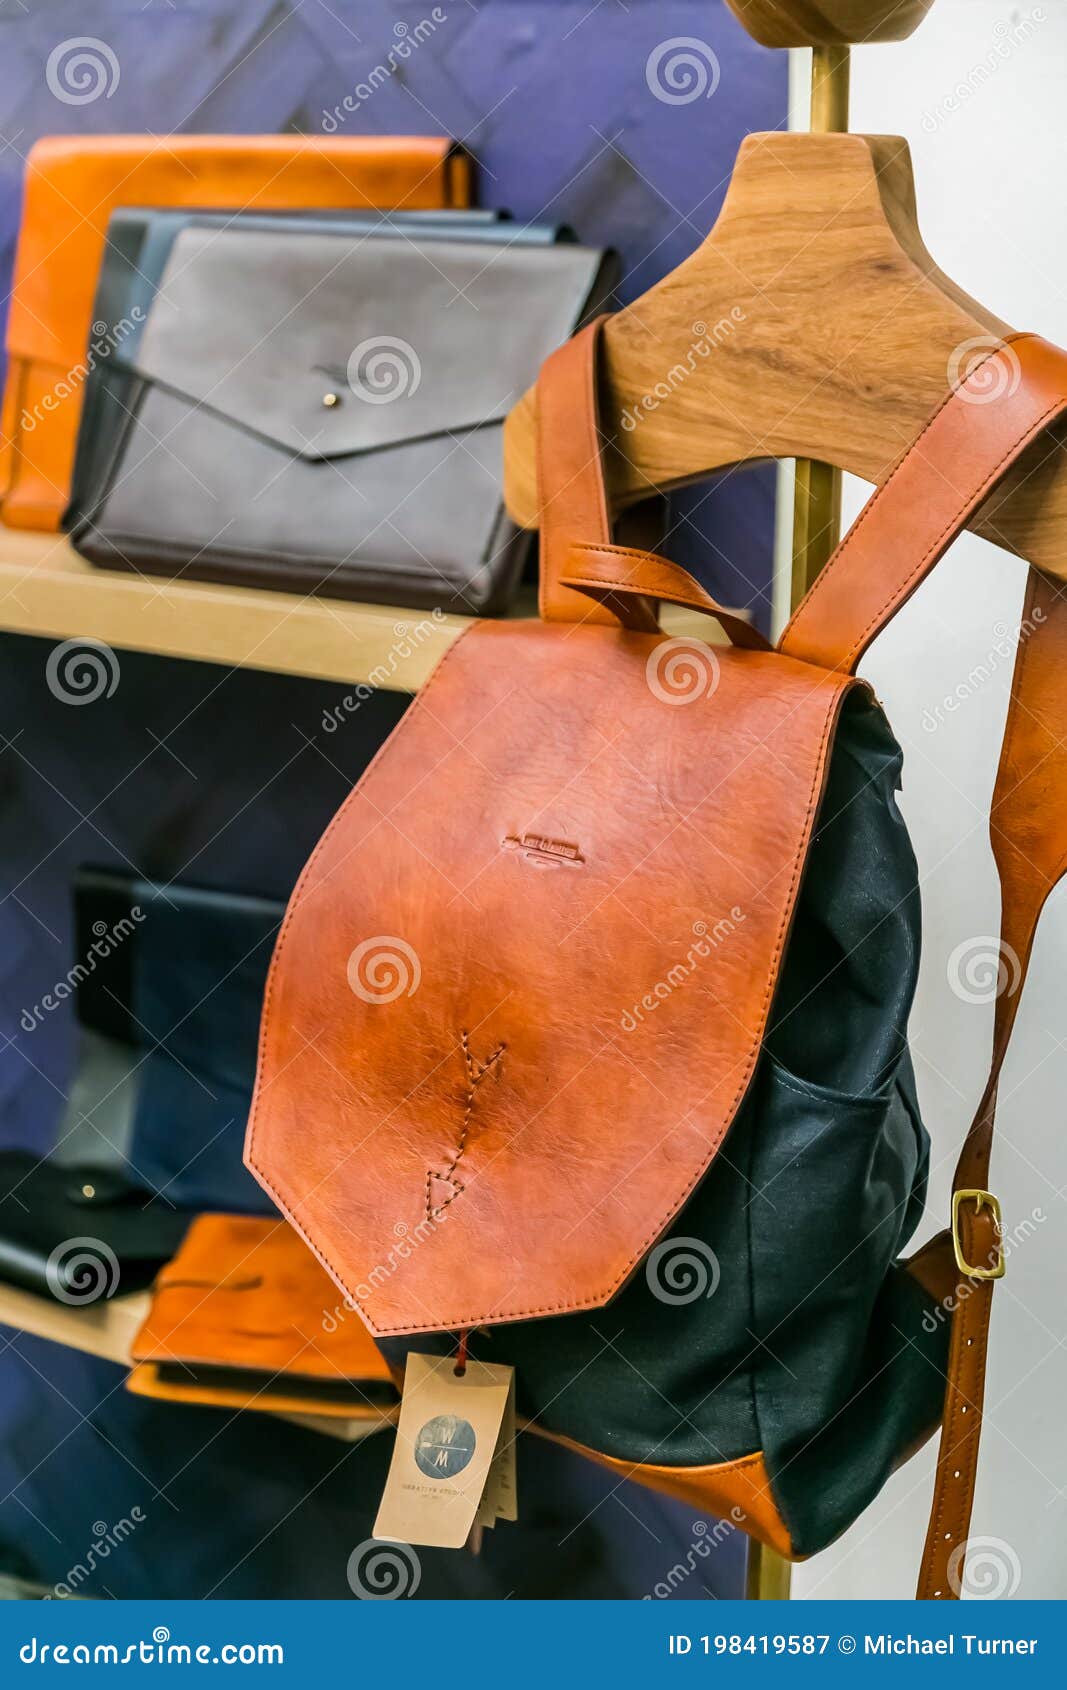 Johannesburg, South Africa - October 14 2017: Handbags in an Up-Market Fashion Clothing Retail Store